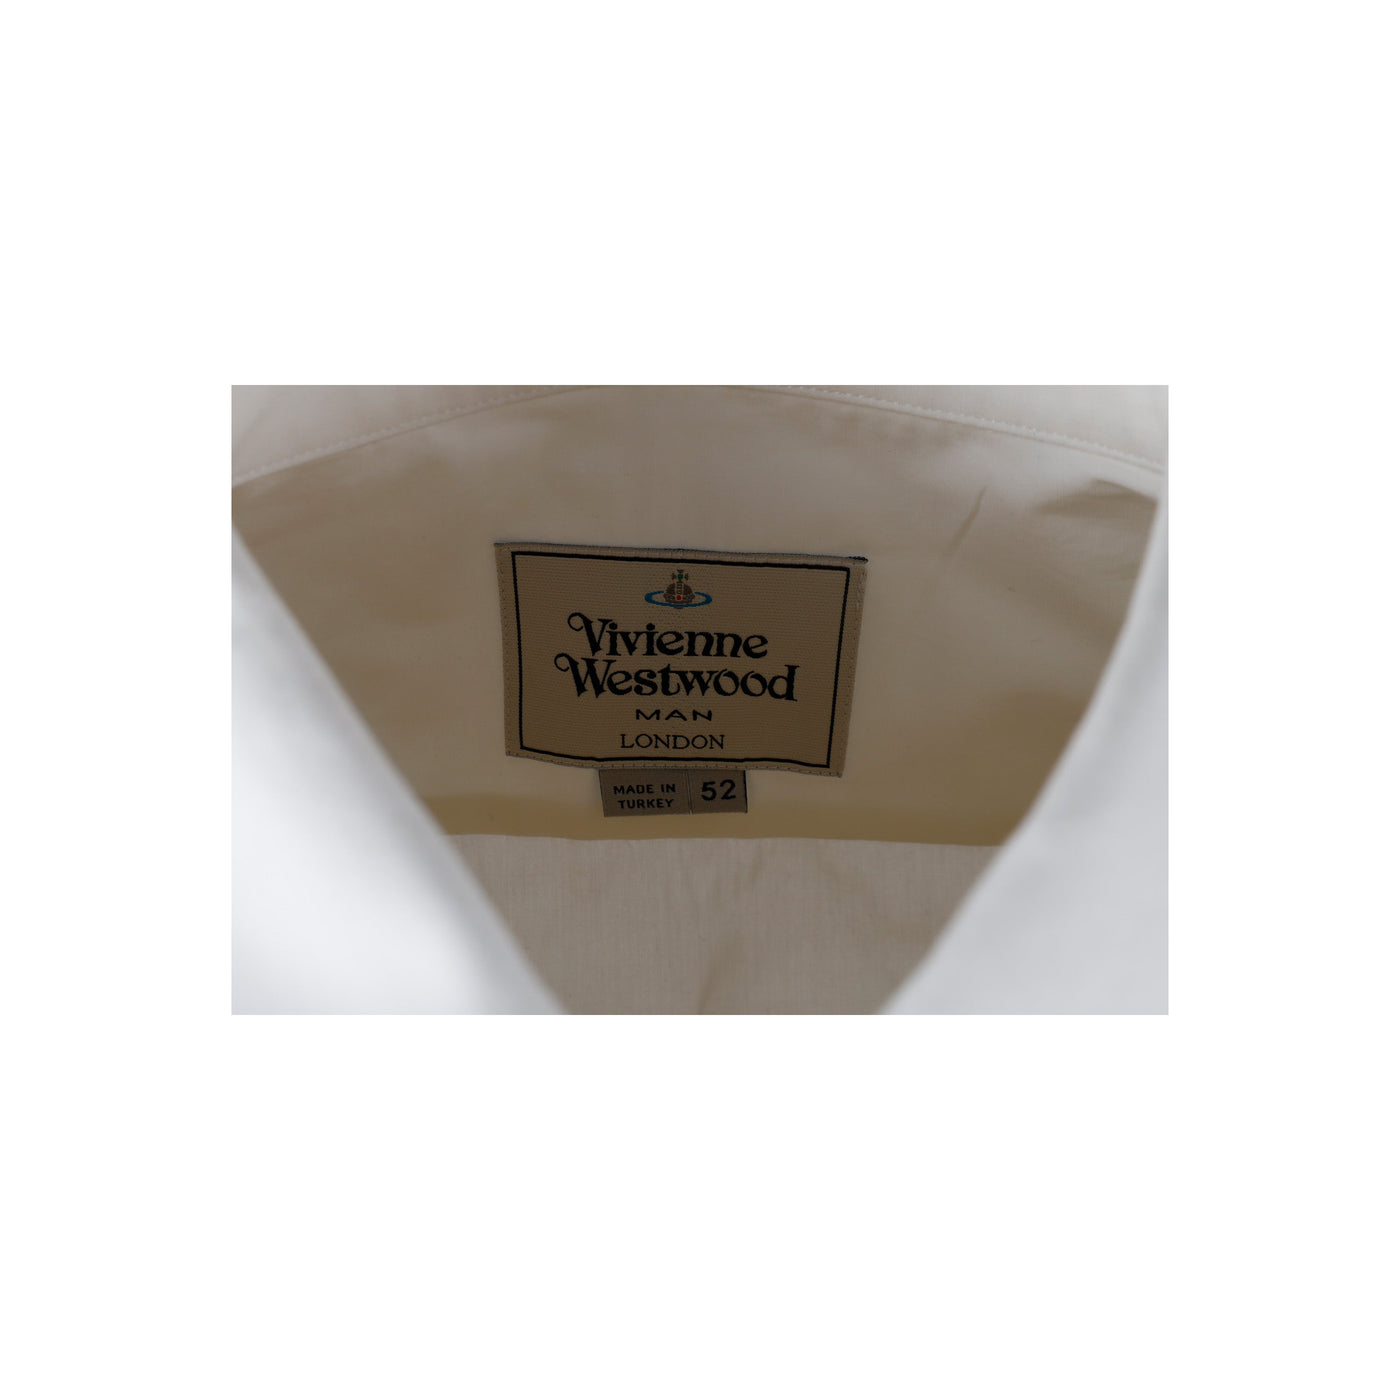 Secondhand Vivienne Westwood Classic White Shirt